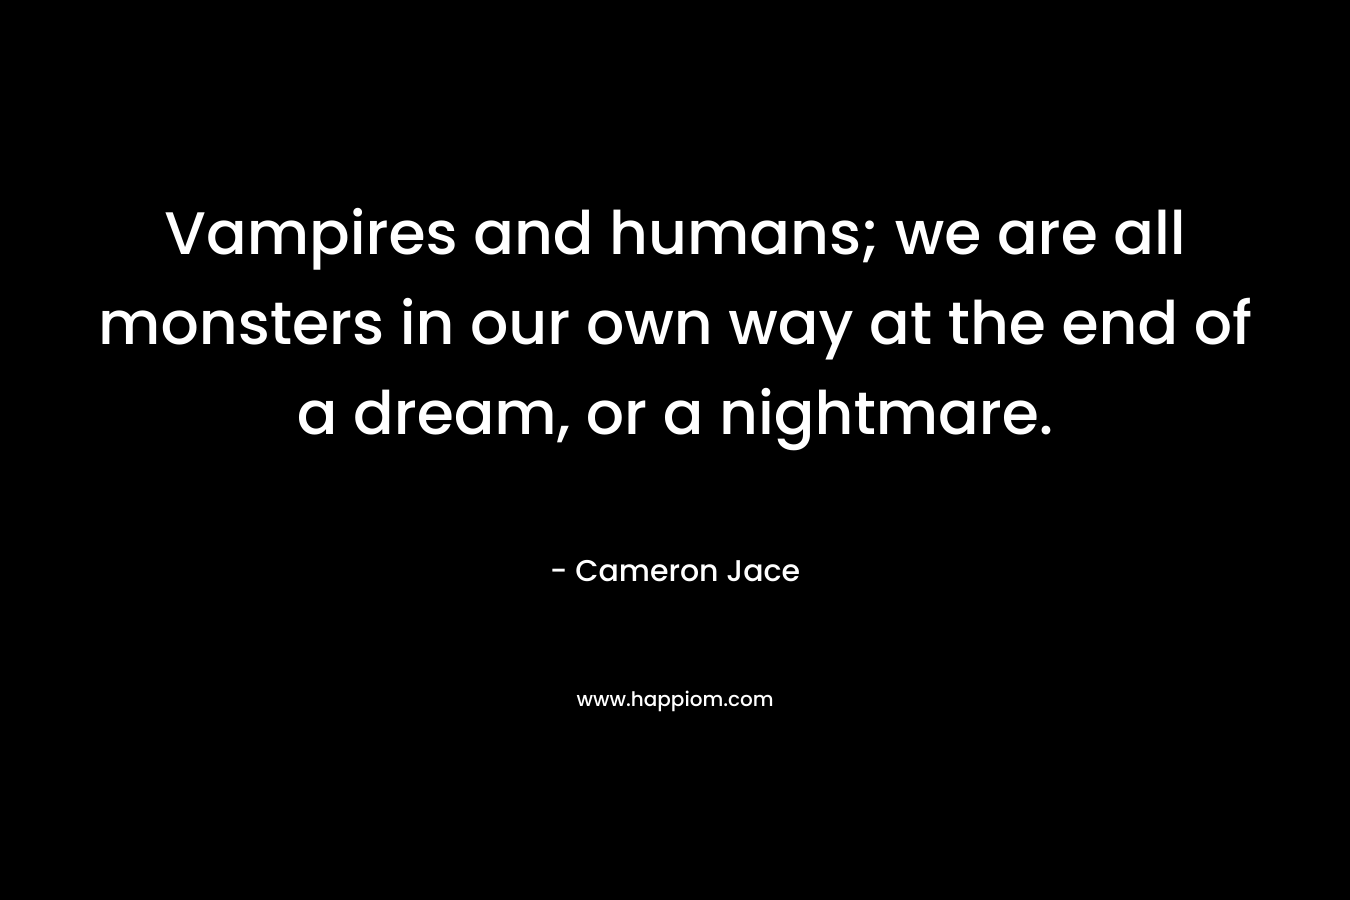 Vampires and humans; we are all monsters in our own way at the end of a dream, or a nightmare.